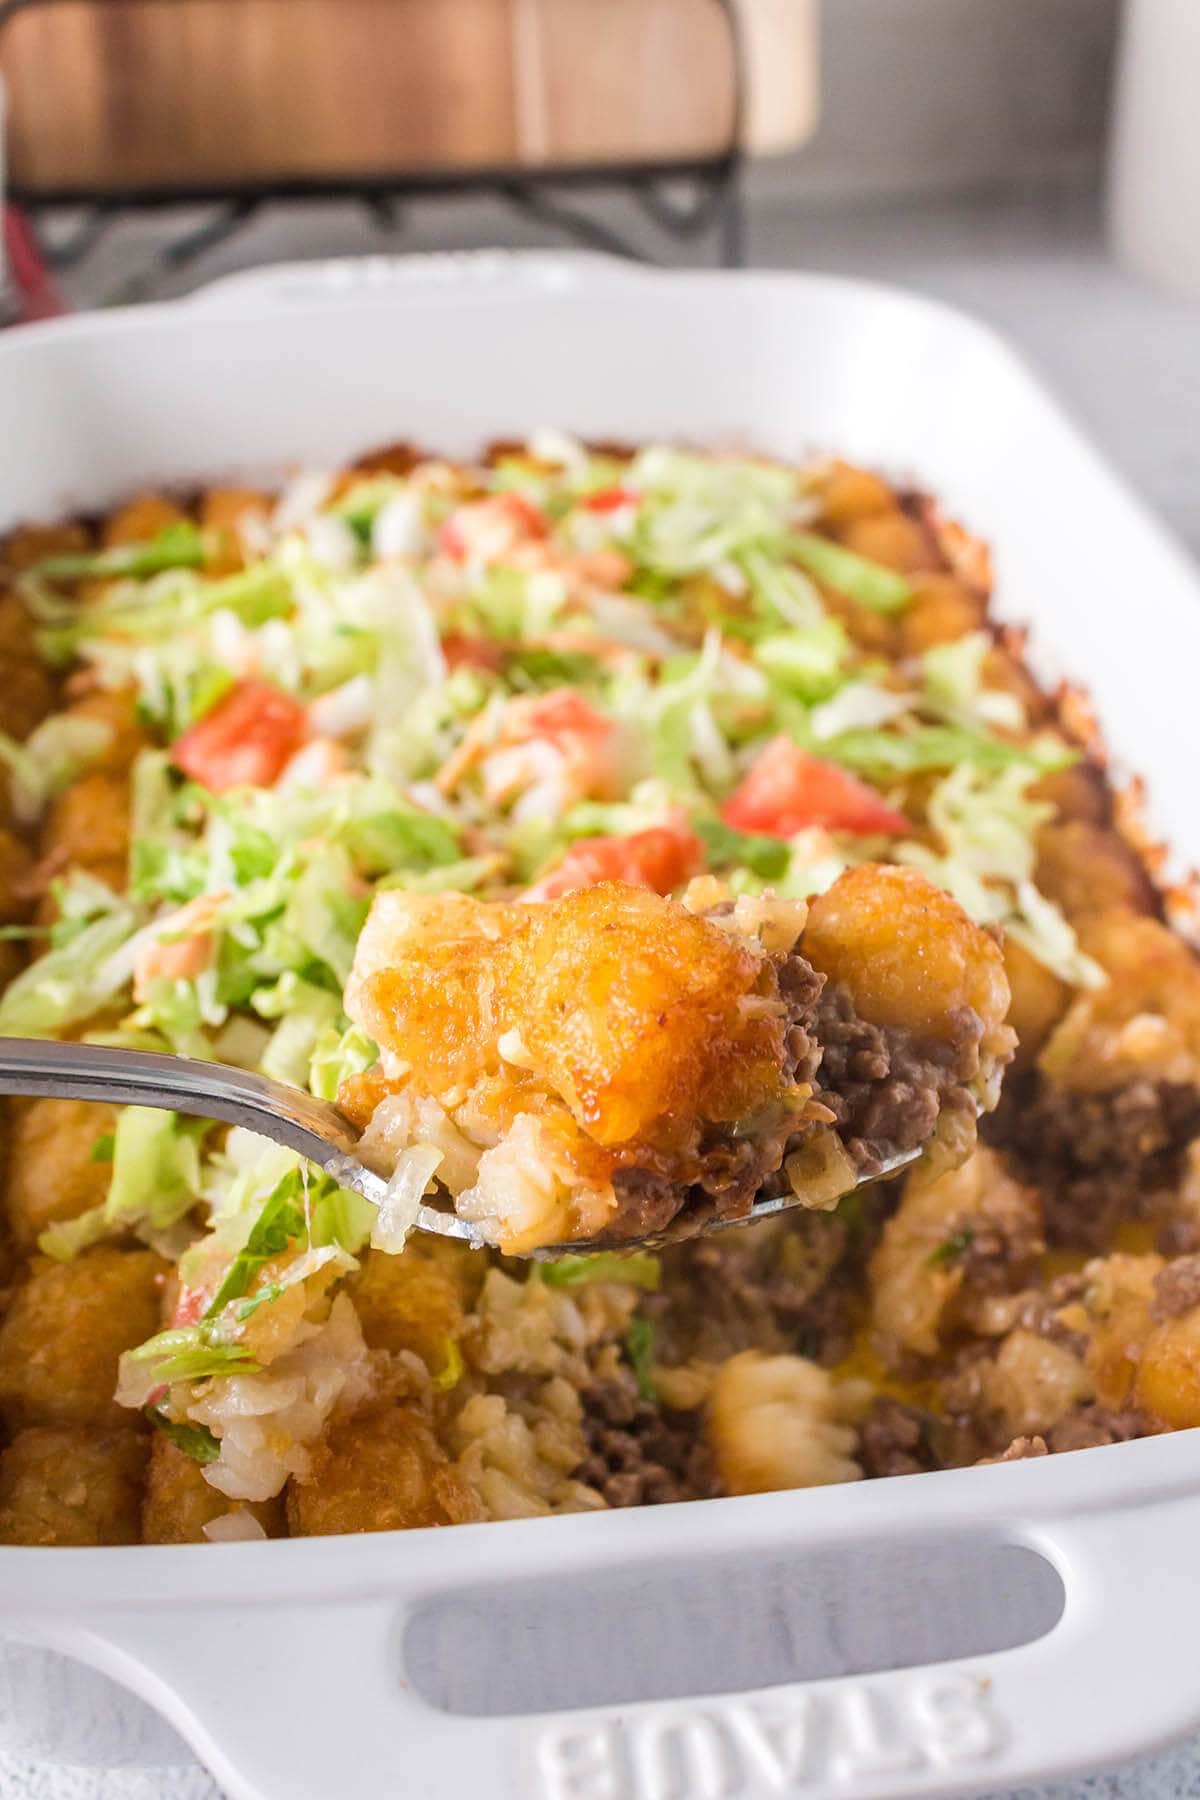 Big Mac Casserole with serving spoon.